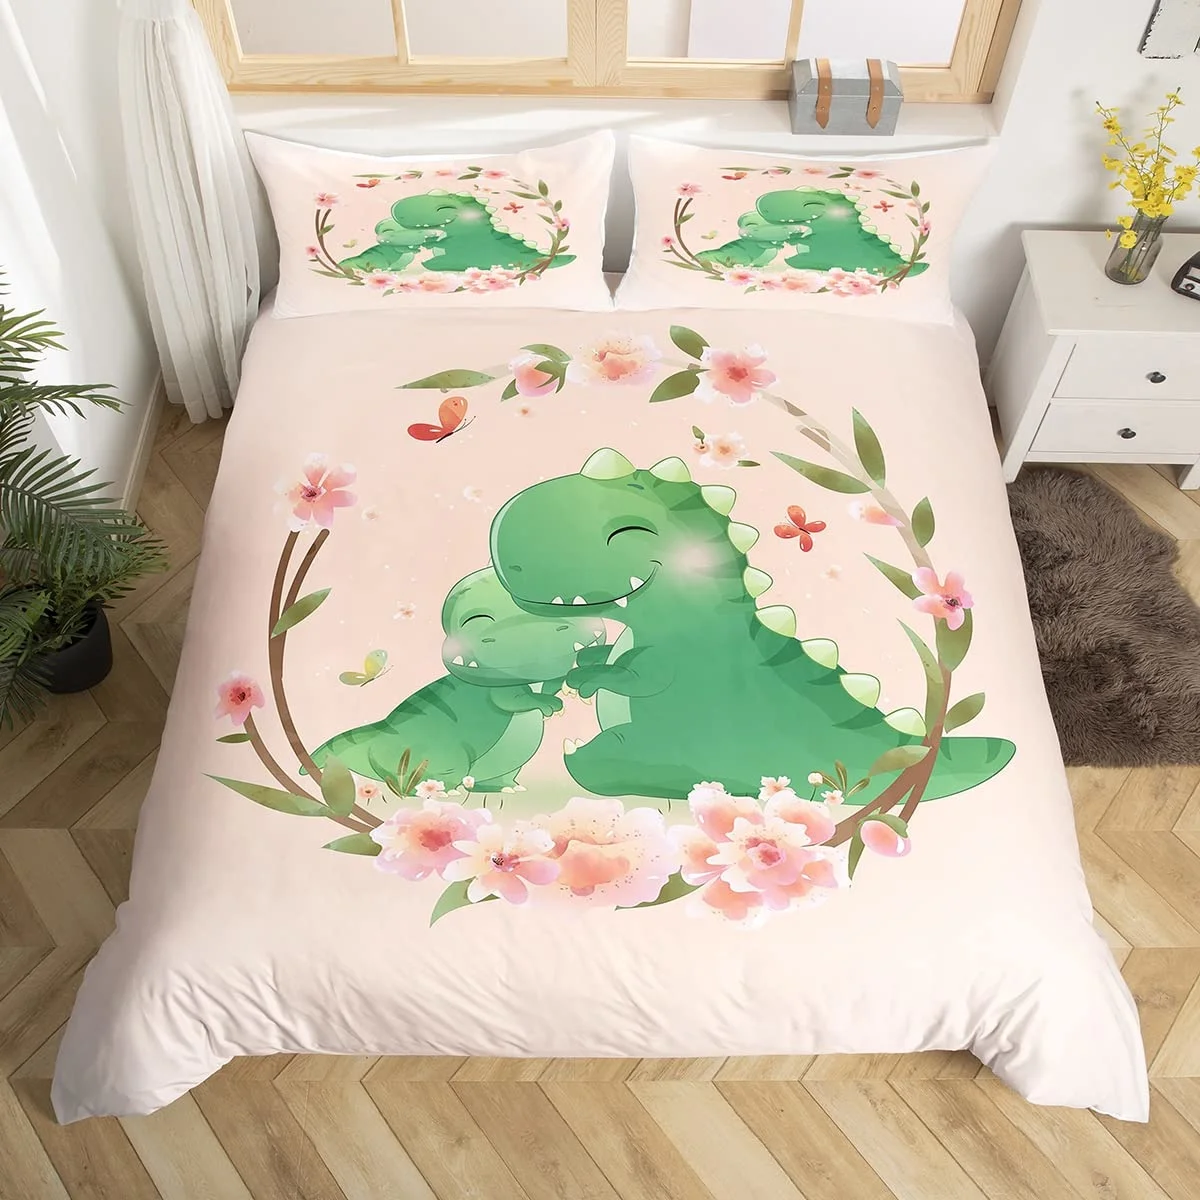 

Cute Dinosaur Duvet Cover Pink Floral Comforter Cover Kawaii Cartoon Animal Bedding Set Twin Japanese Cherry Blossoms Bed Cover